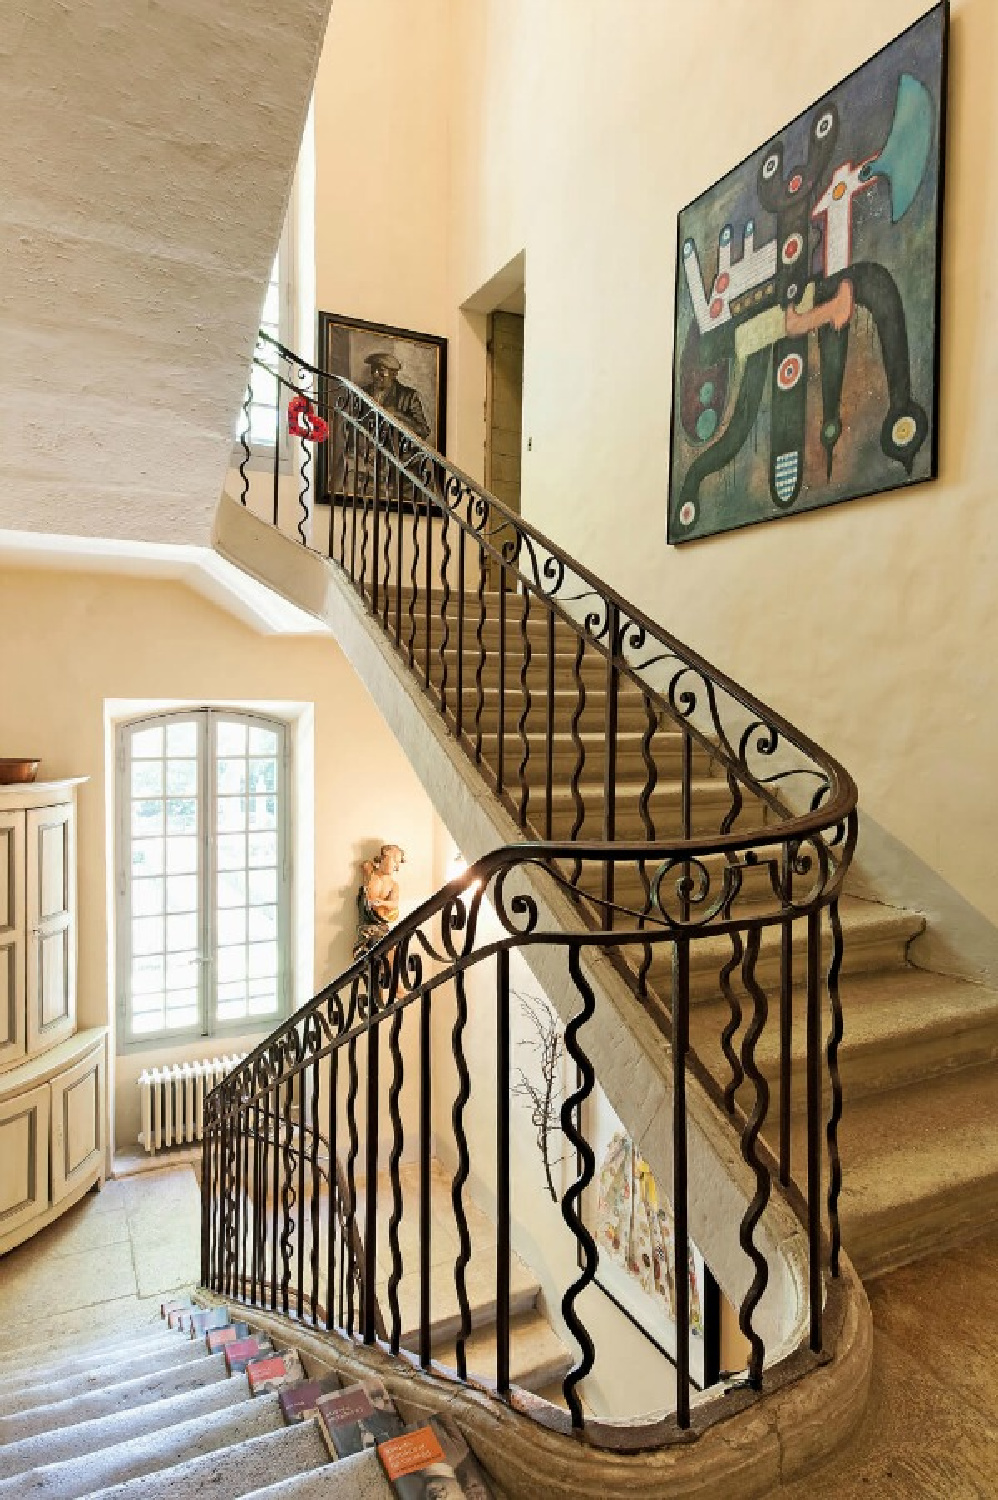 Iron staircase with curves in 18th century Provençal home - Chateau Mireille. Photo: Haven In.  This villa is a vacation rental near St-Rémy-de-Provence. #frenchcountrystaircase #frenchstaircase #frenchchateau